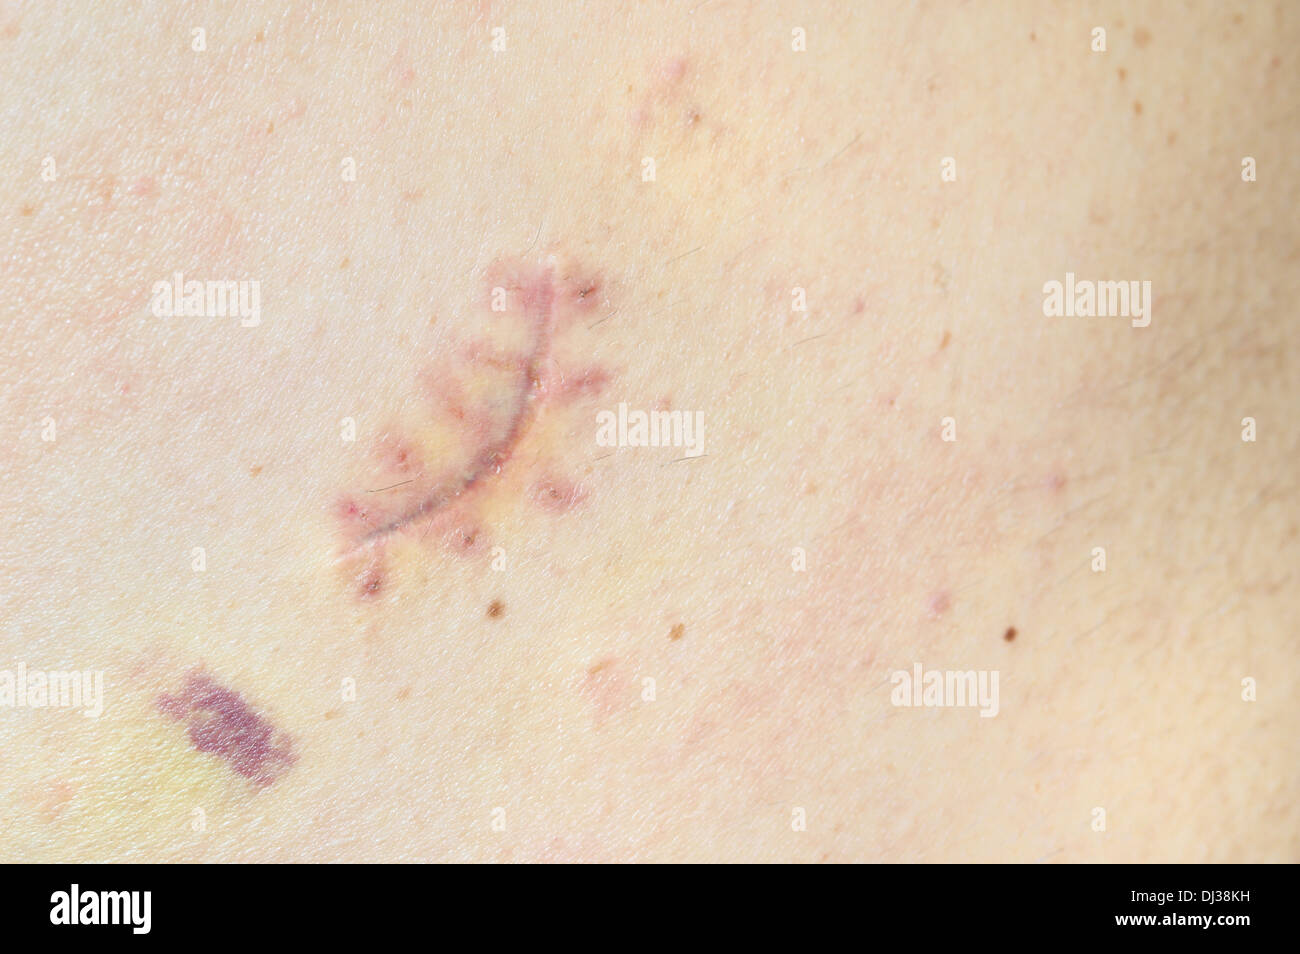 Close-up of a fresh scar on a male back. Skin nevus removed. Stock Photo